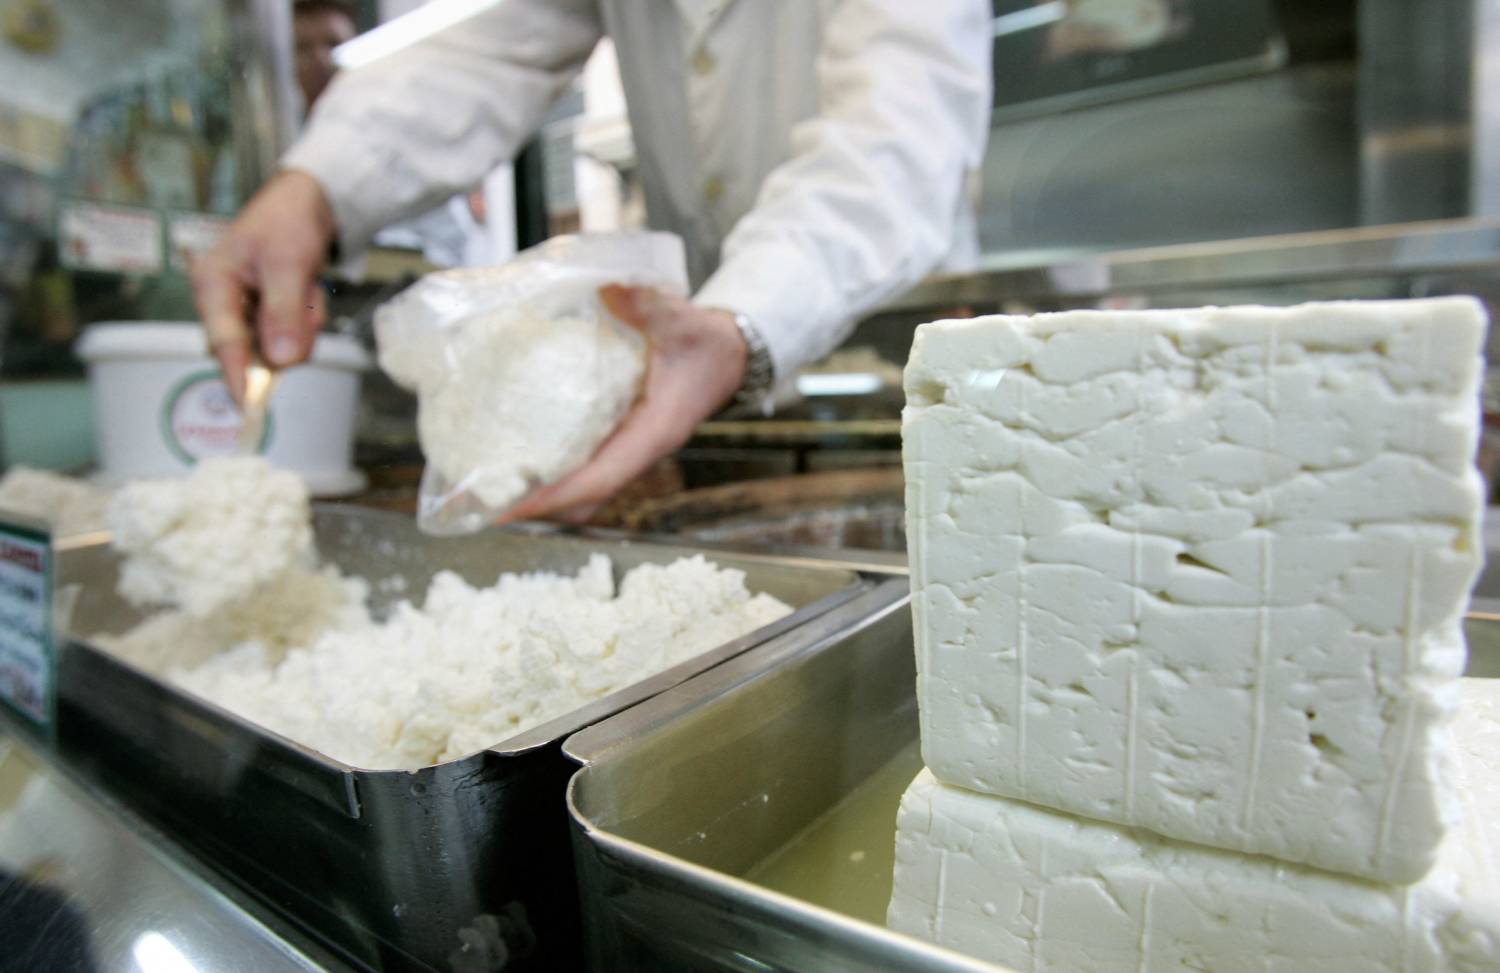 File Photo: A Cheesemonger Puts Pieces Of Greece's Trademark Feta Cheese In A Bag For A Customer In Central Athens,